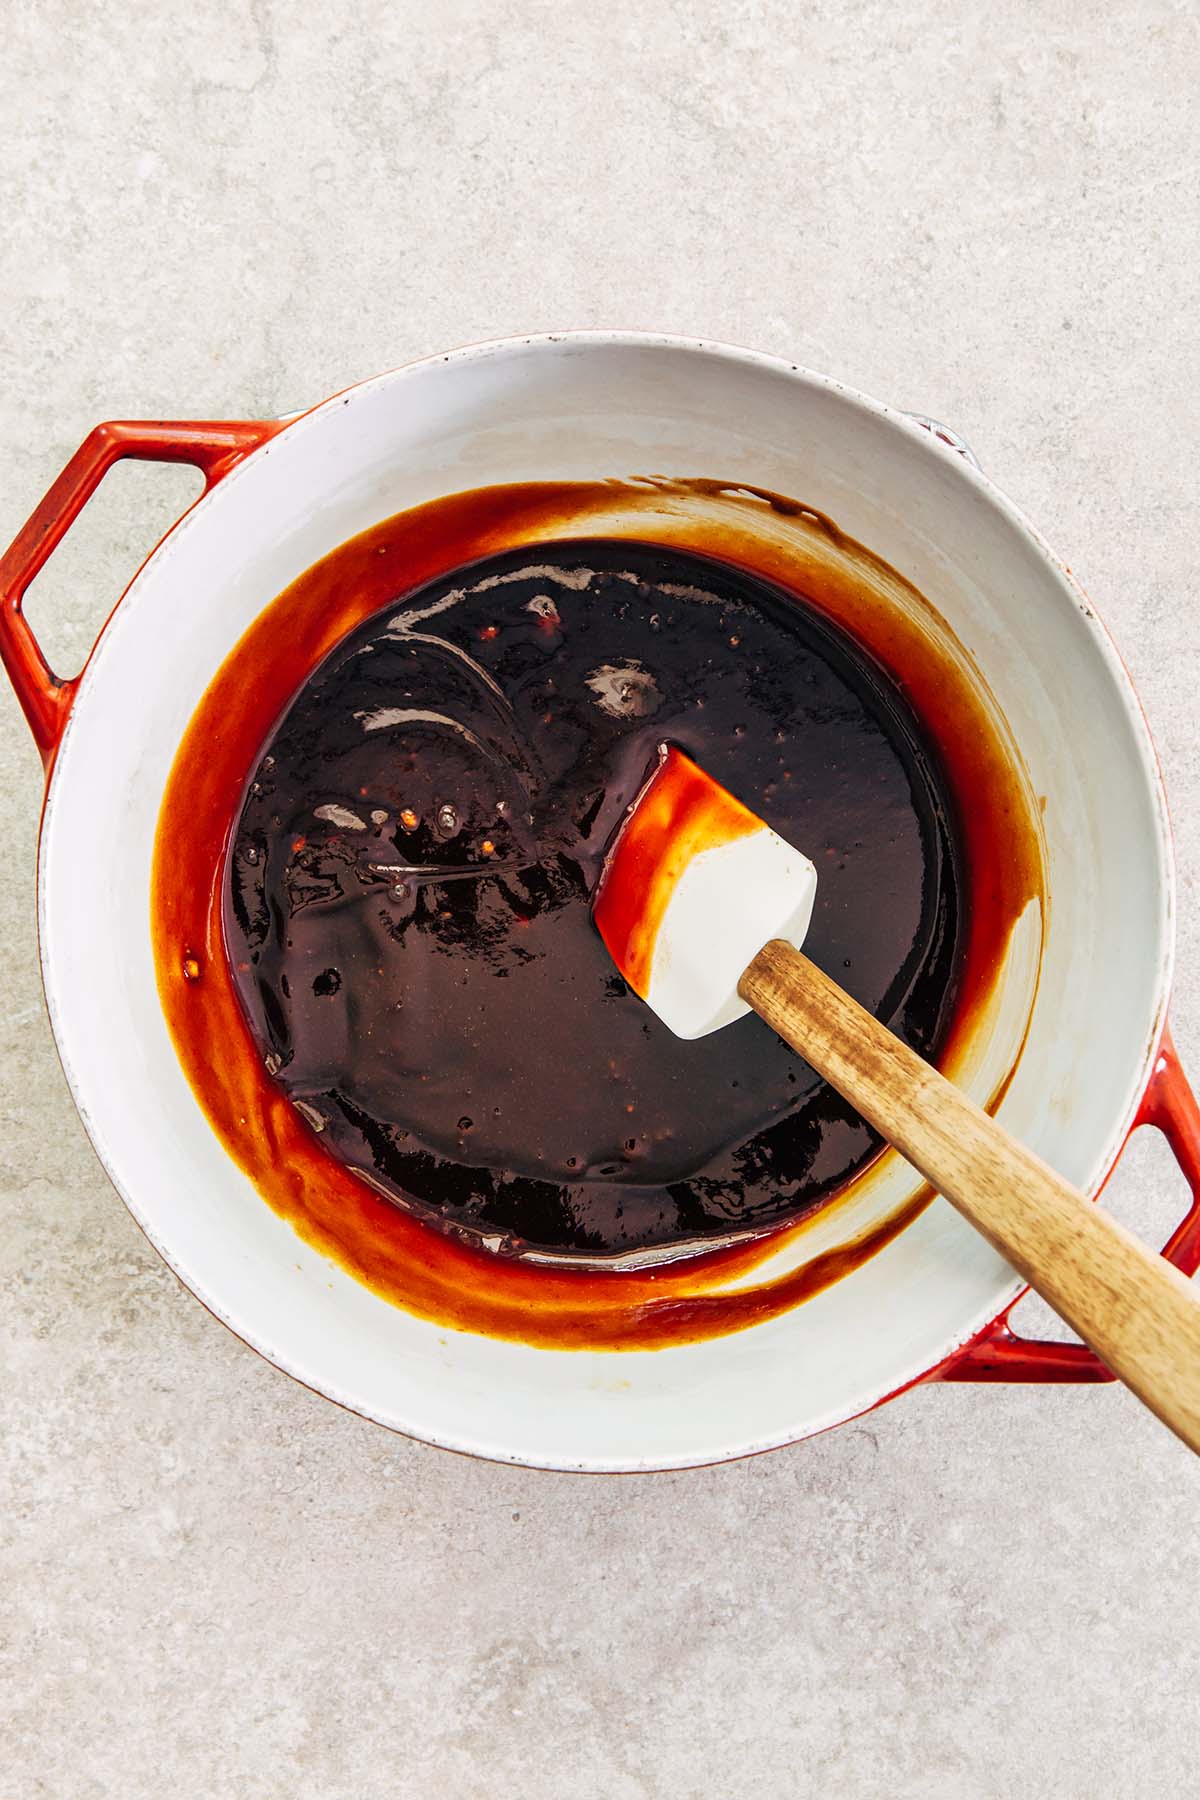 Molasses mixture stirred together in a pot.